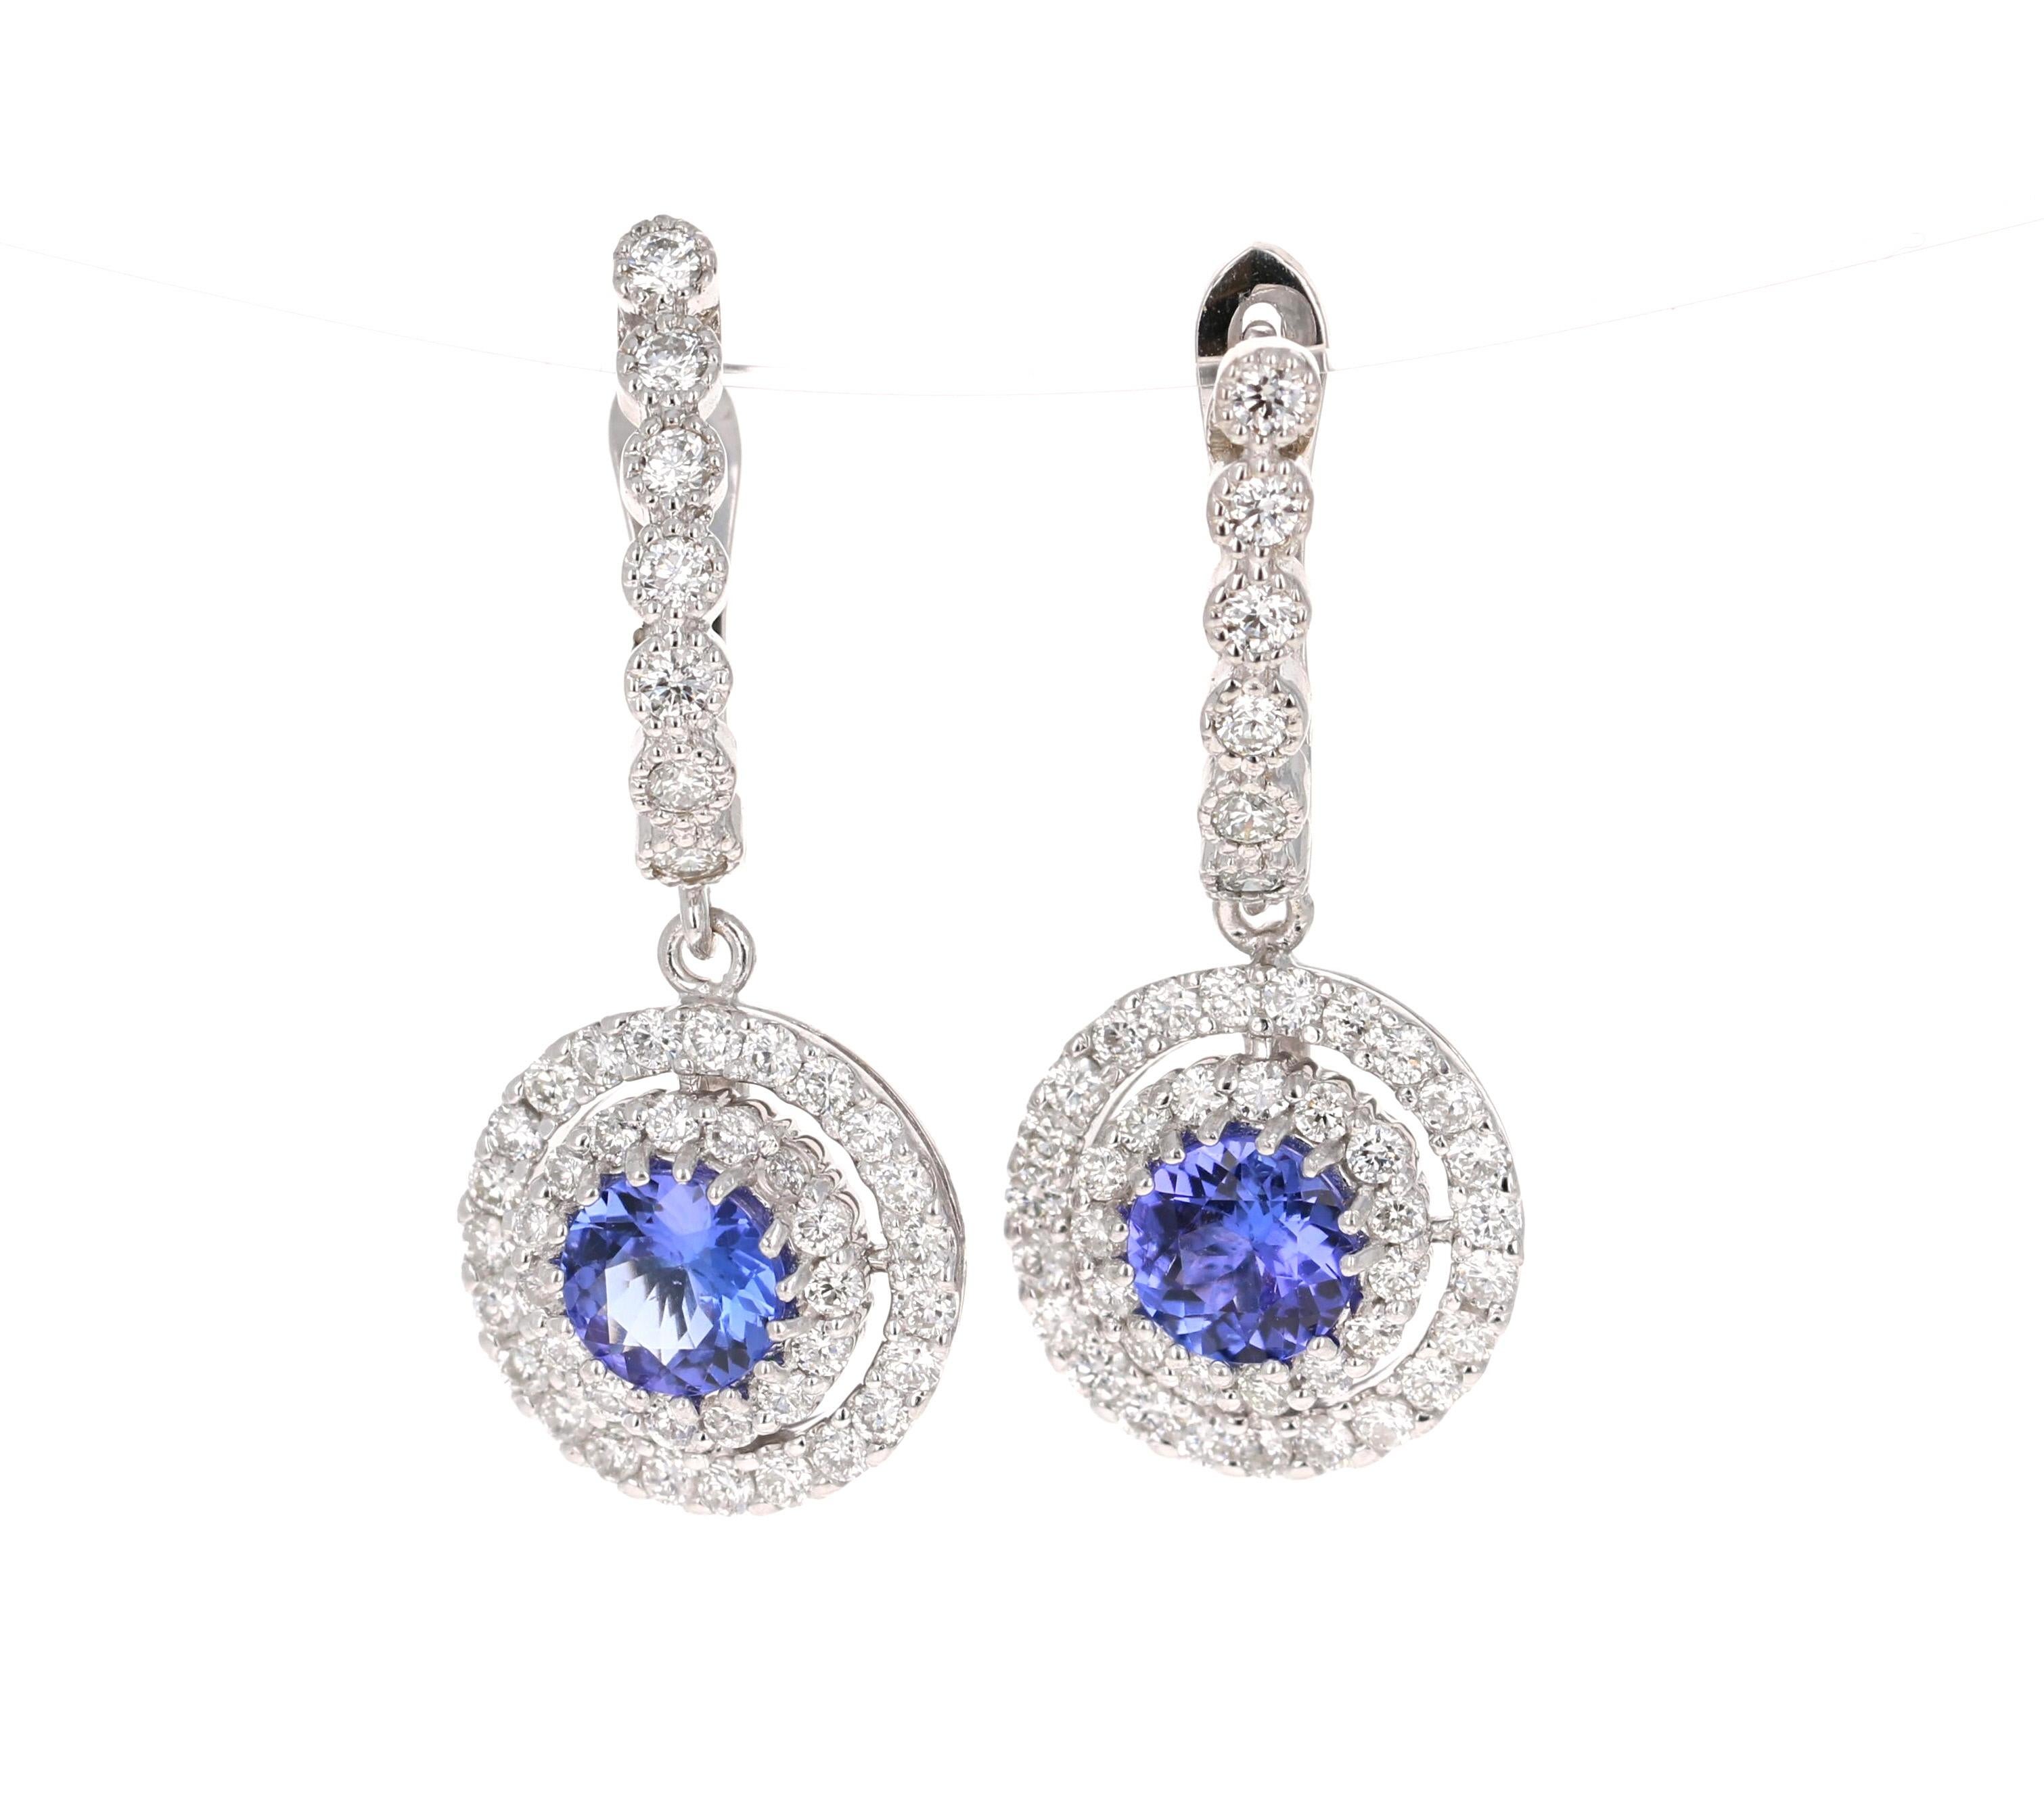 The most stunning Tanzanite diamond earrings! Classy and Chic!

These beauties have 2 Round Cut Tanzanites that weigh 1.51 Carats and 91 Round Cut Diamonds that weigh 1.68 Carats. The total carat weight of the earrings are 3.19 Carats. (Clarity: